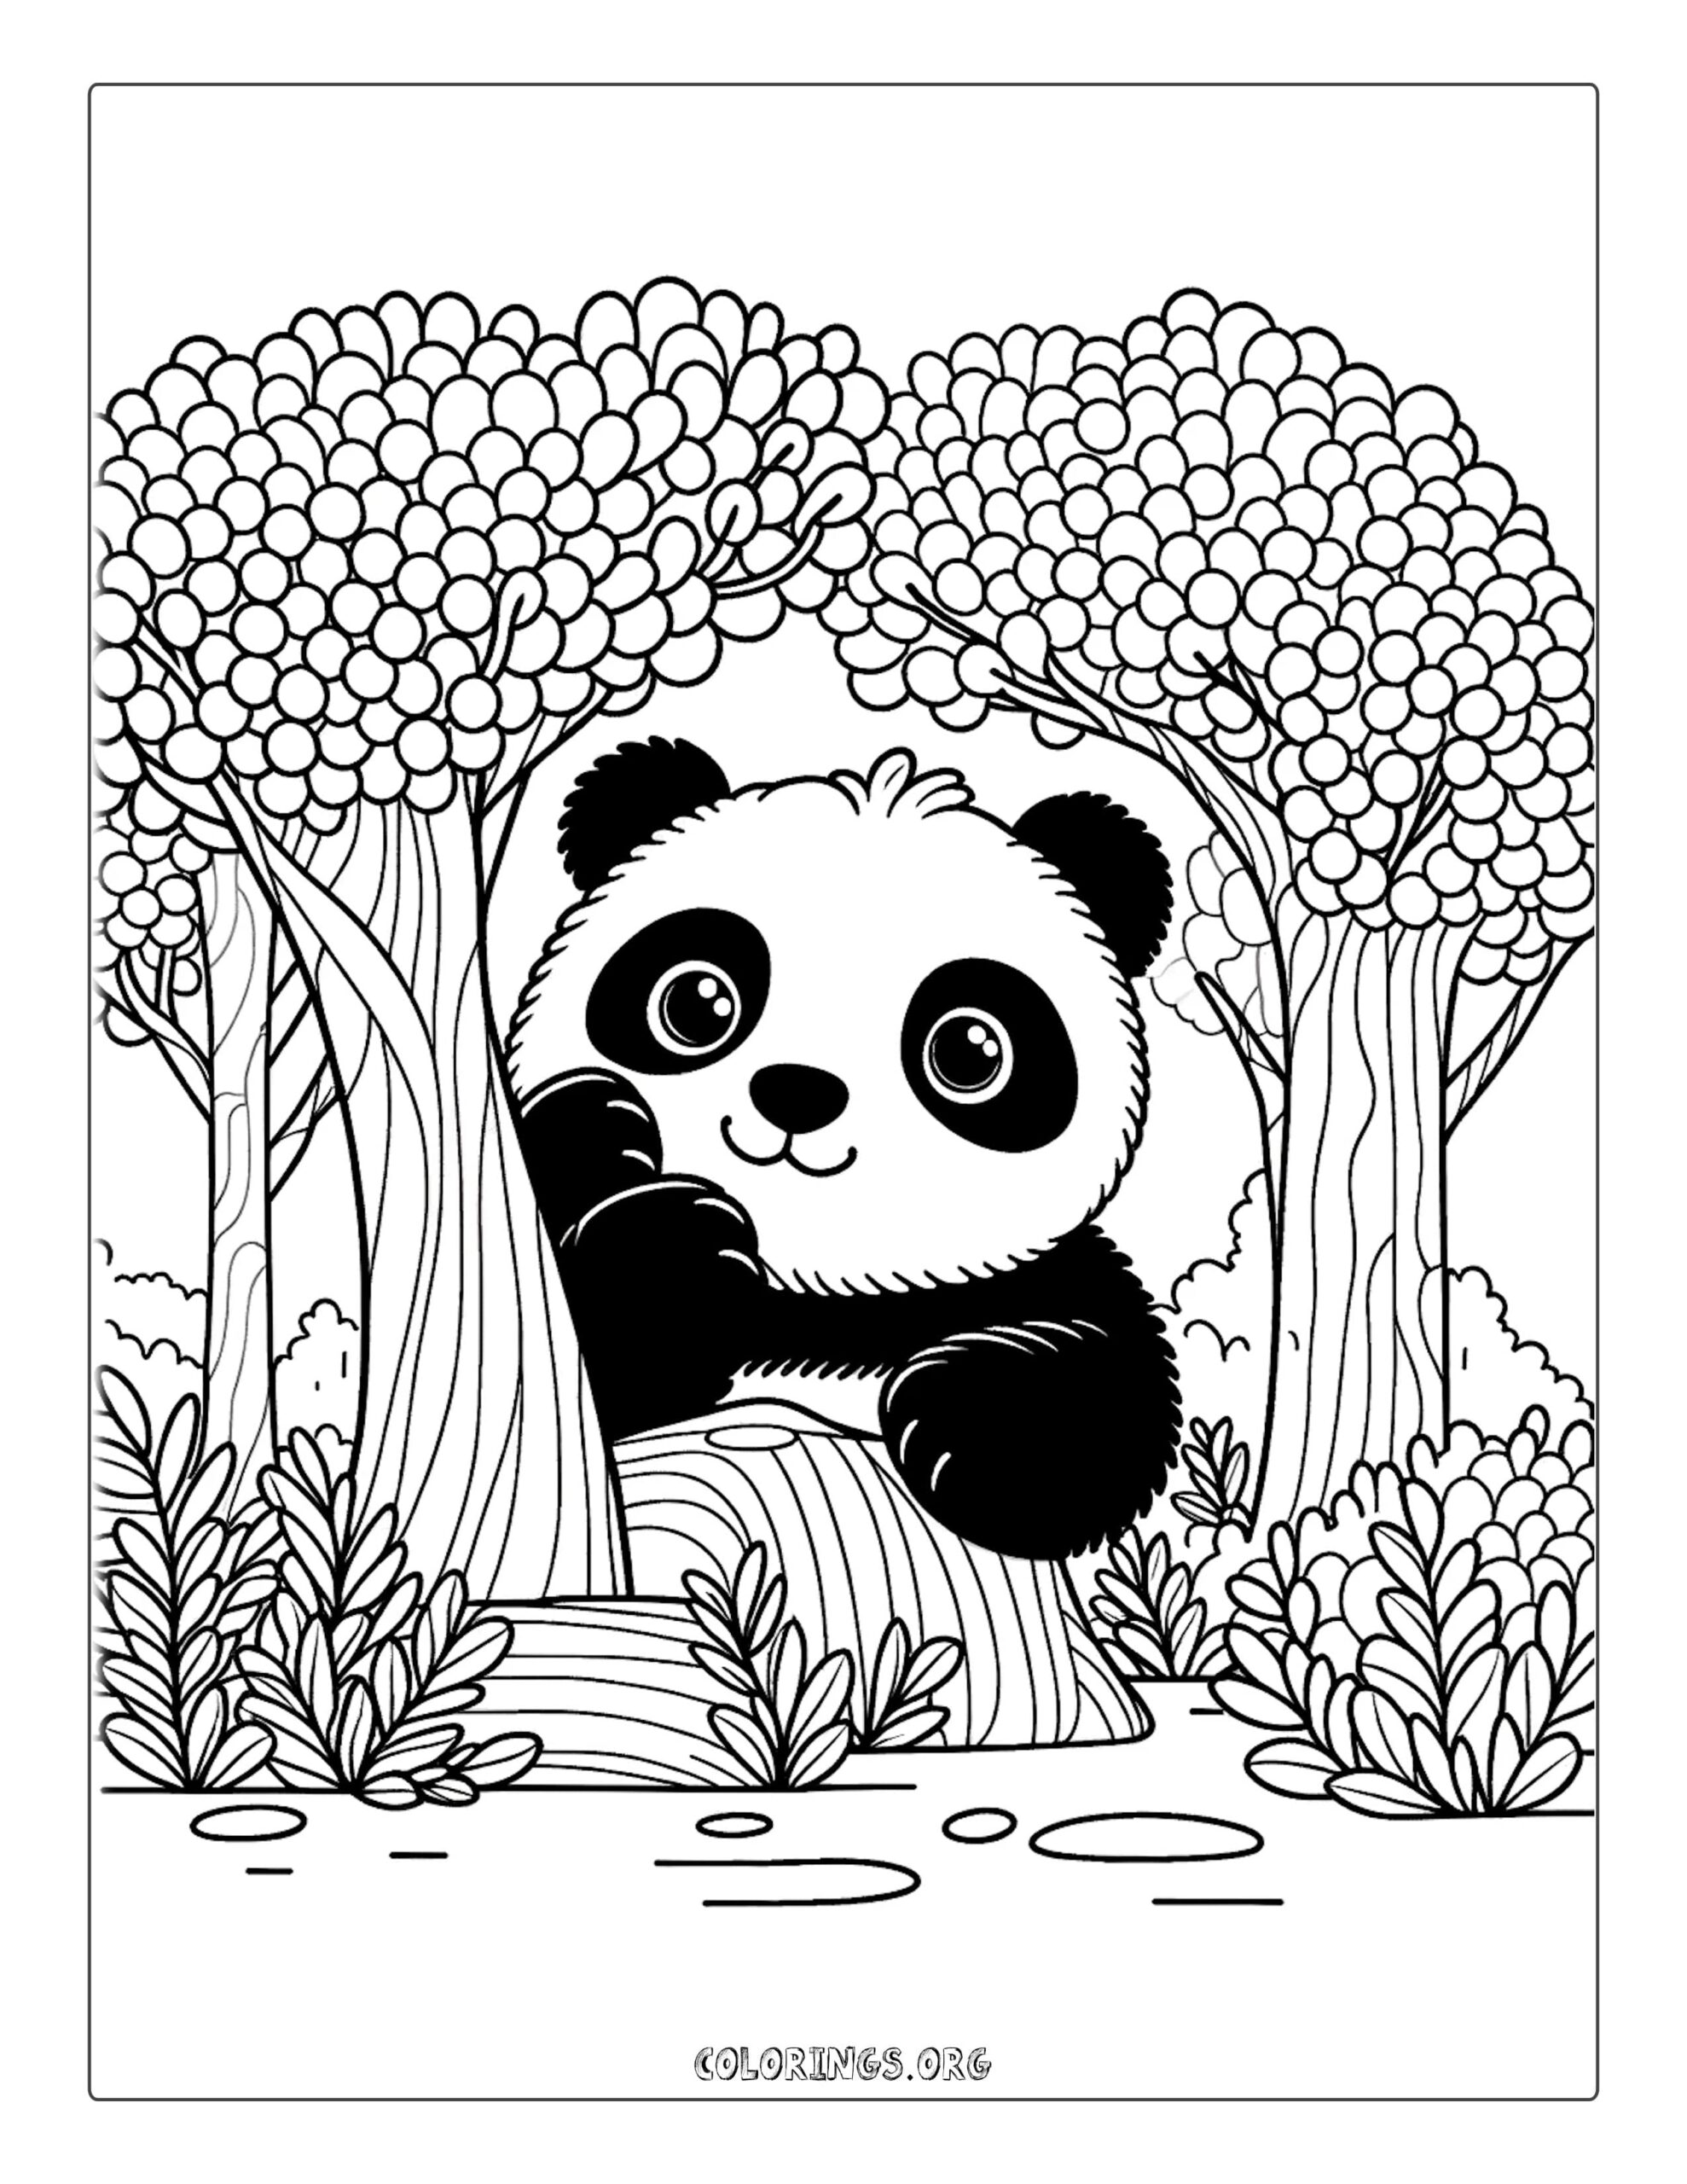 Curious Panda Behind Trees Coloring Page